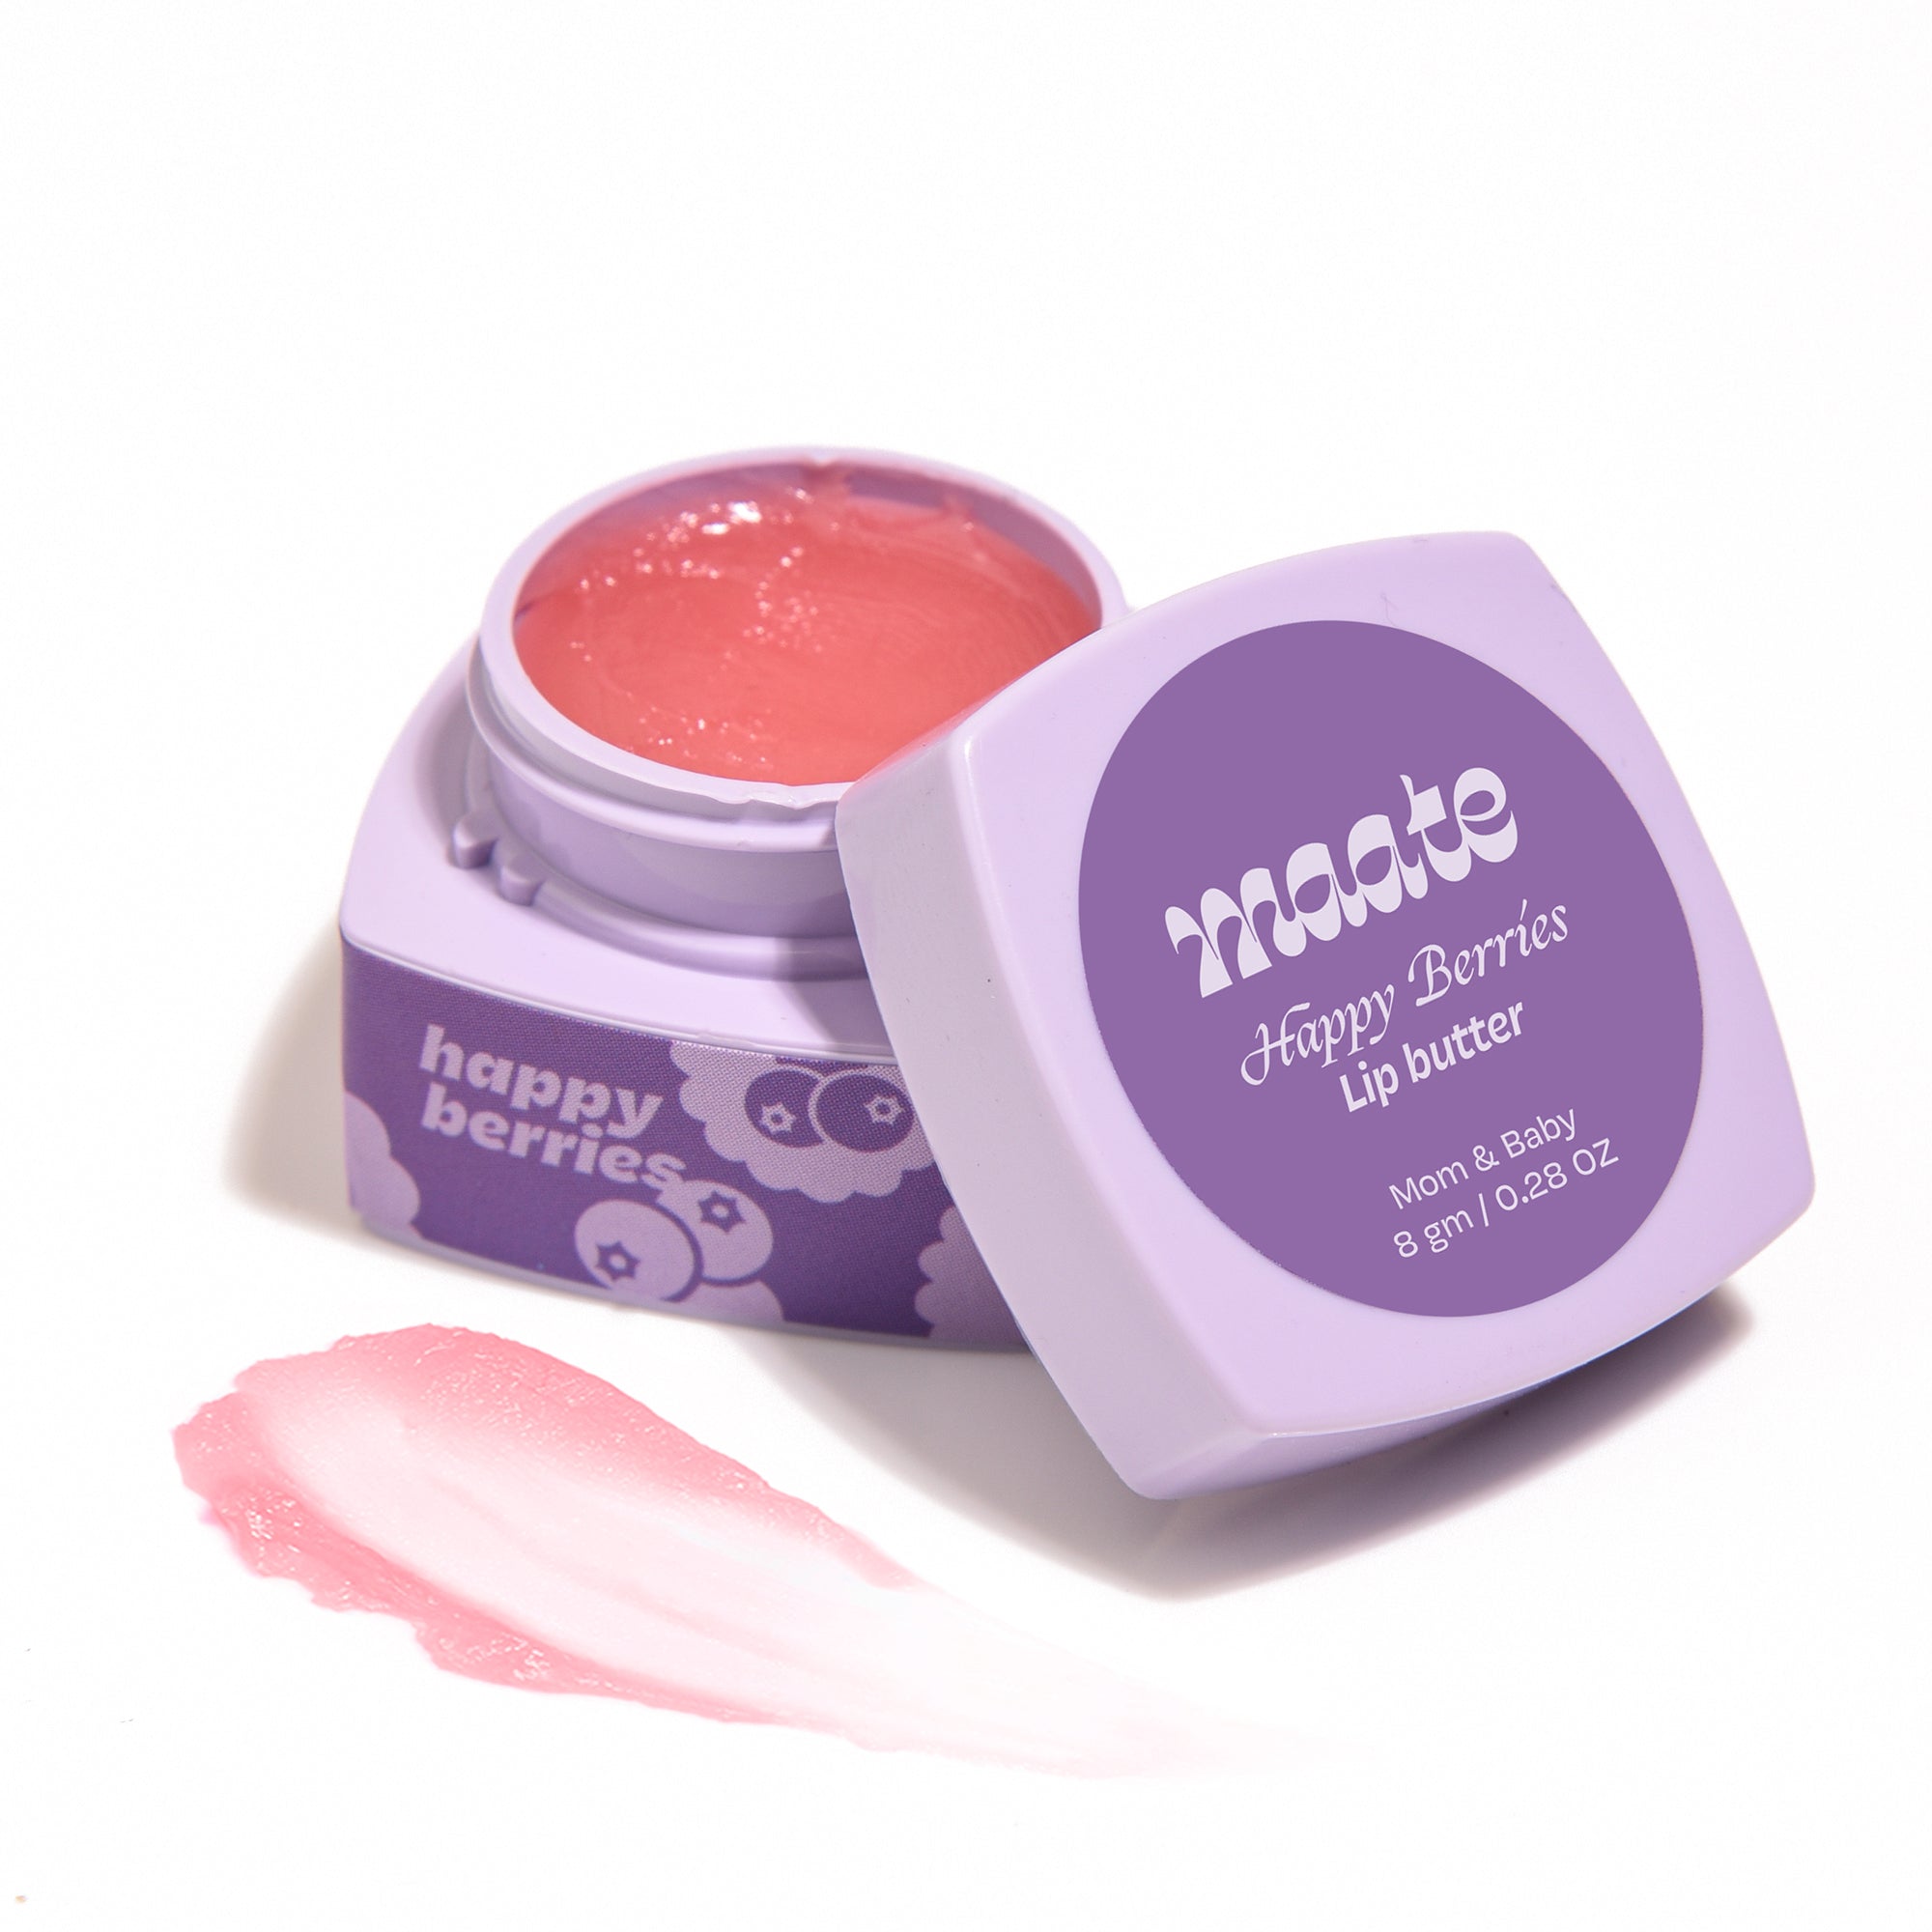 Happy Berries Lip Butter 100% Natural | FDA Approved